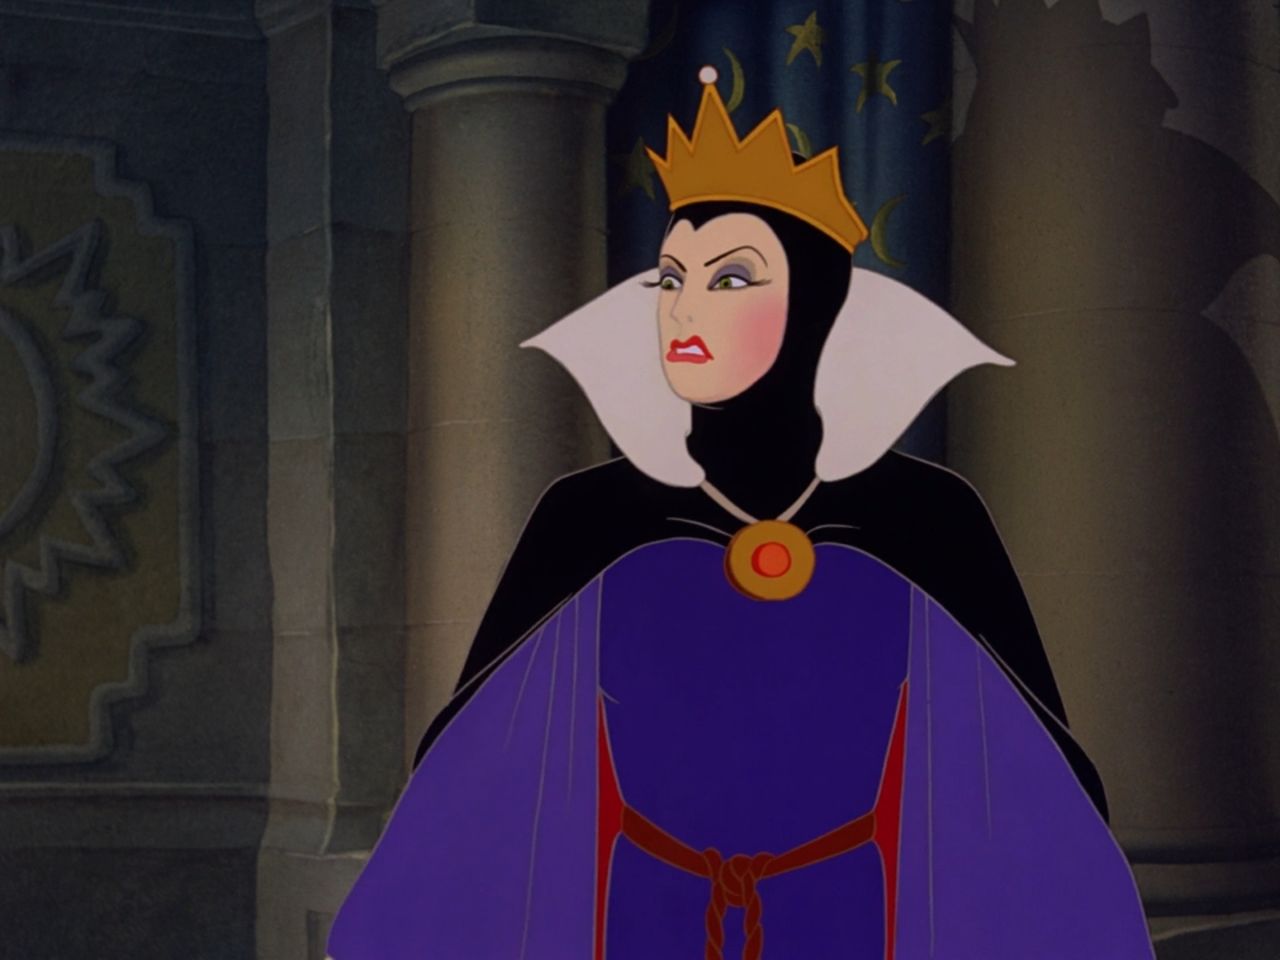 Confidence can cause delusion and what finer example of that than The Queen in "Snow White and The Seven Dwarfs." Her evil plan to kill Snow White and become the "fairest of them all" inevitably fails. Sometimes it's best to admit that we can't have it all. 